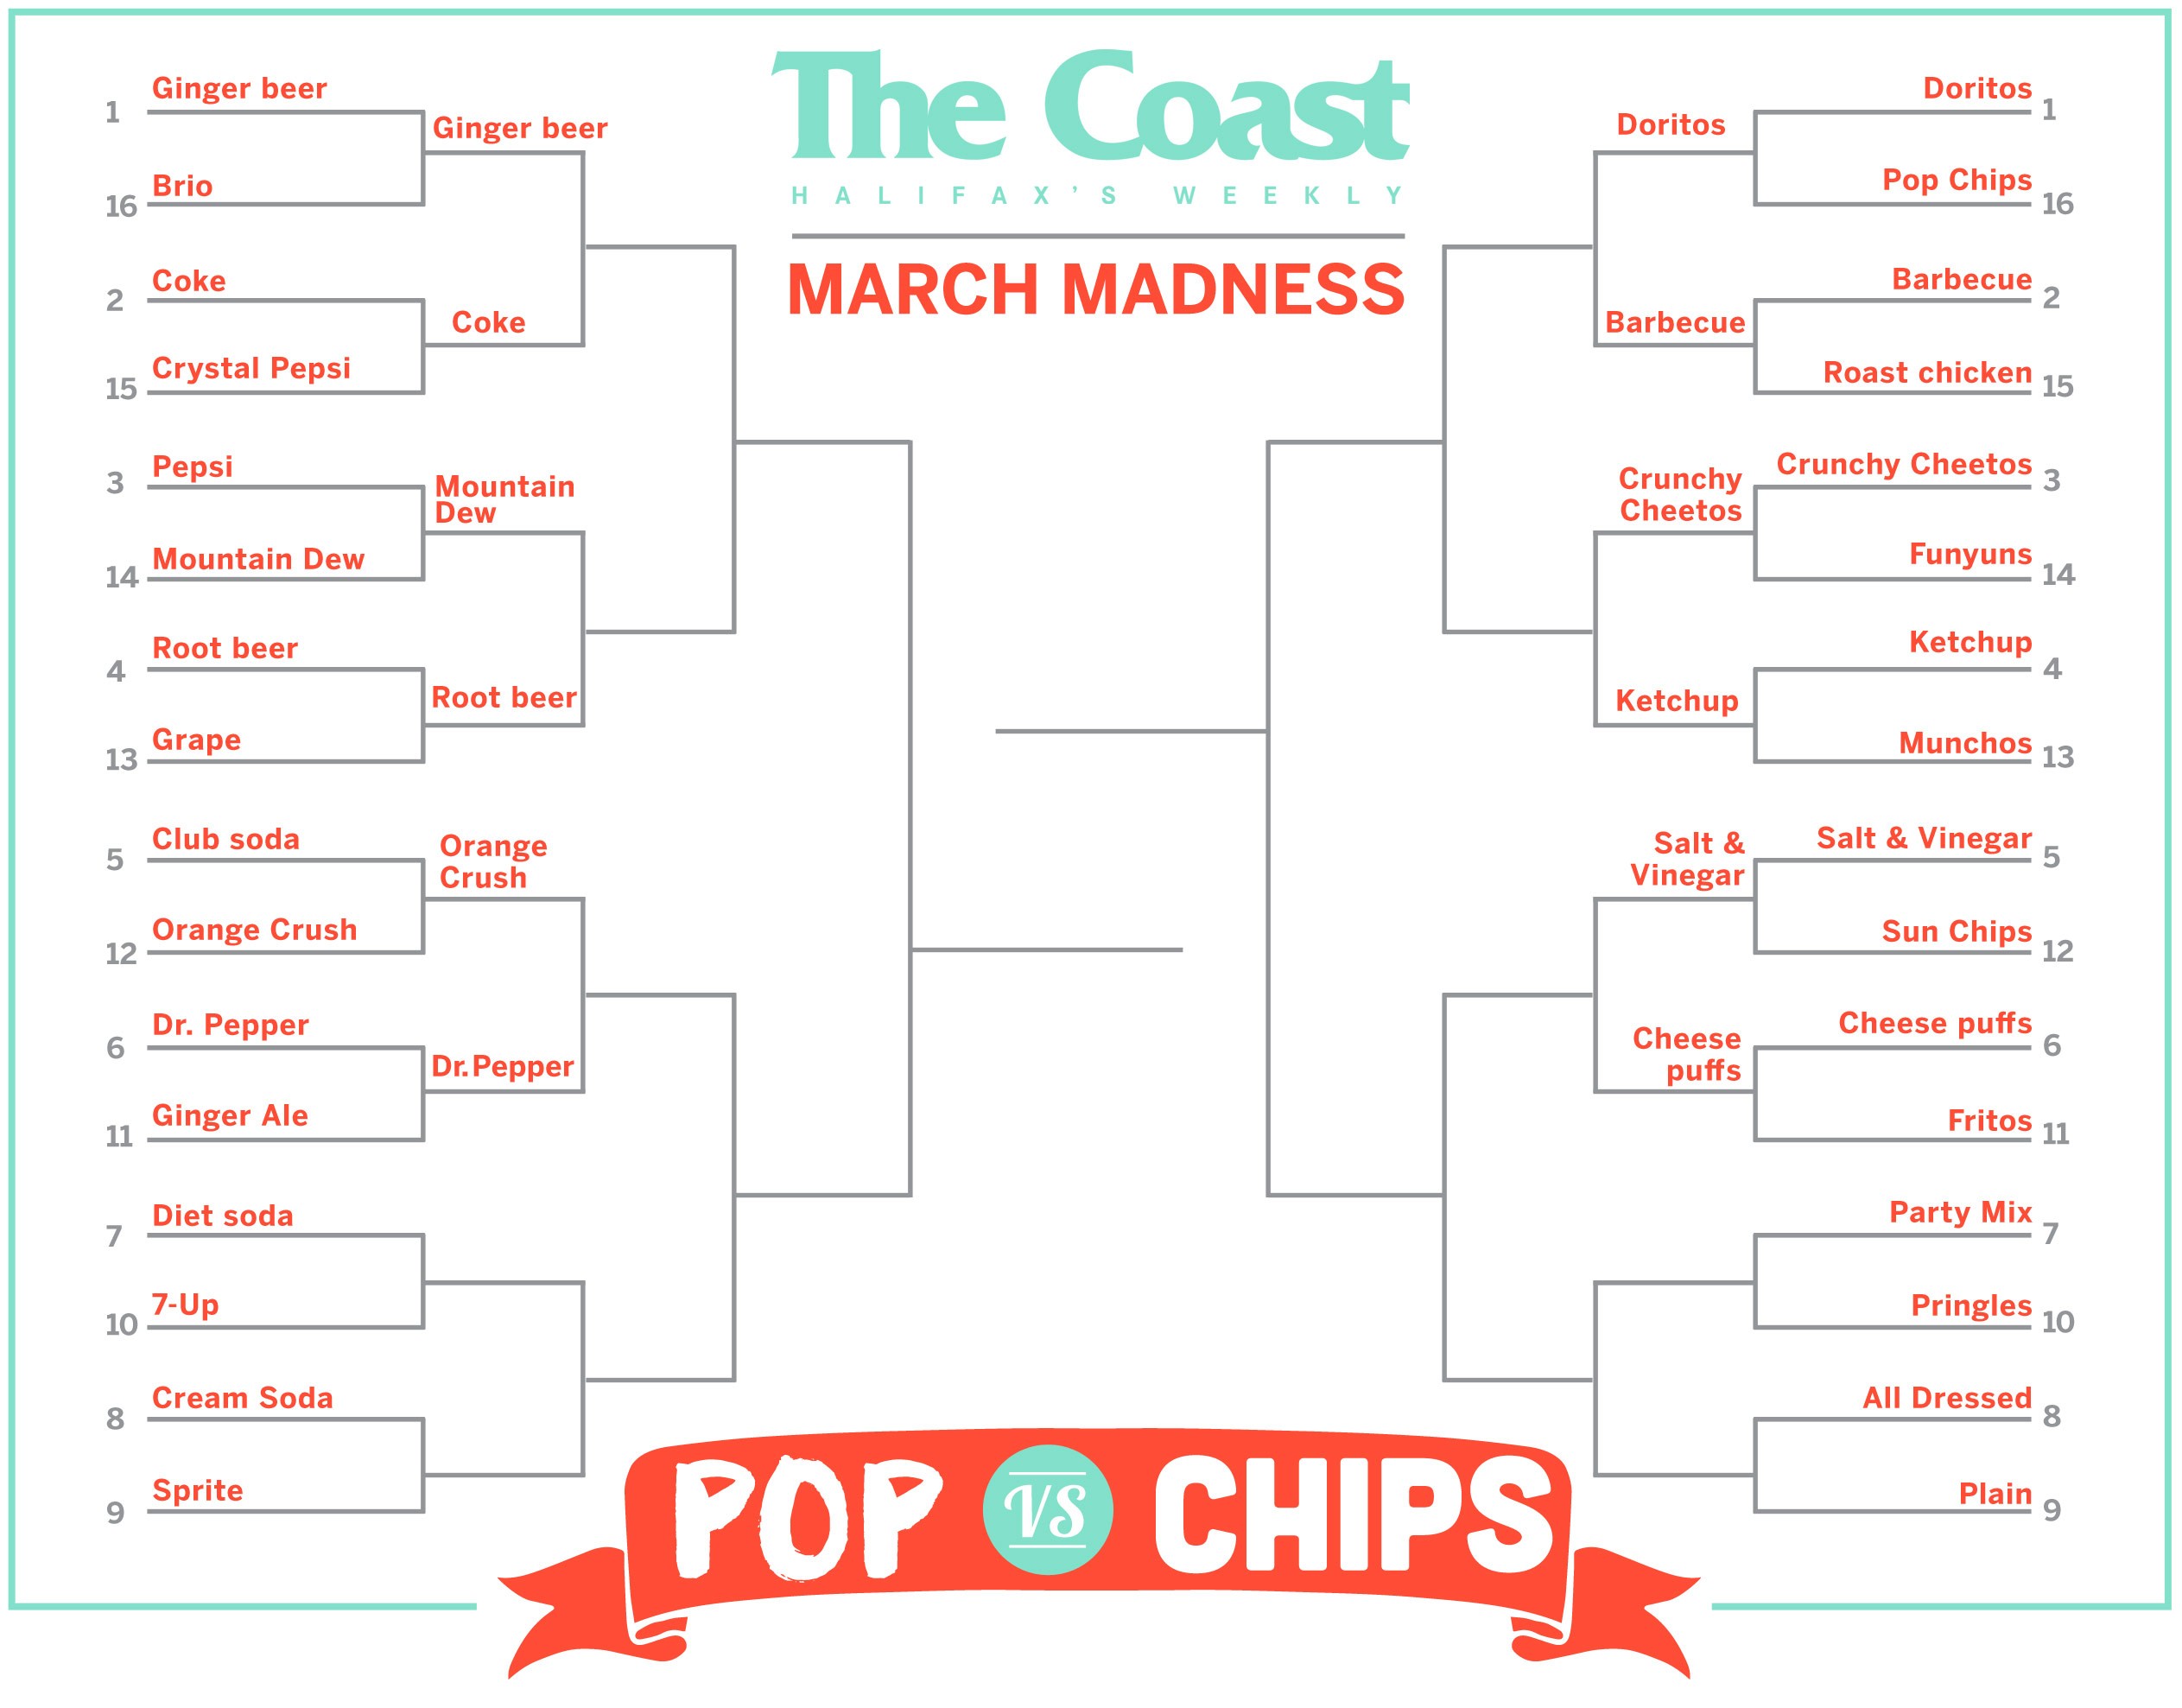 March Madness Day 7: Diet soda vs 7-up and Party Mix vs Pringles